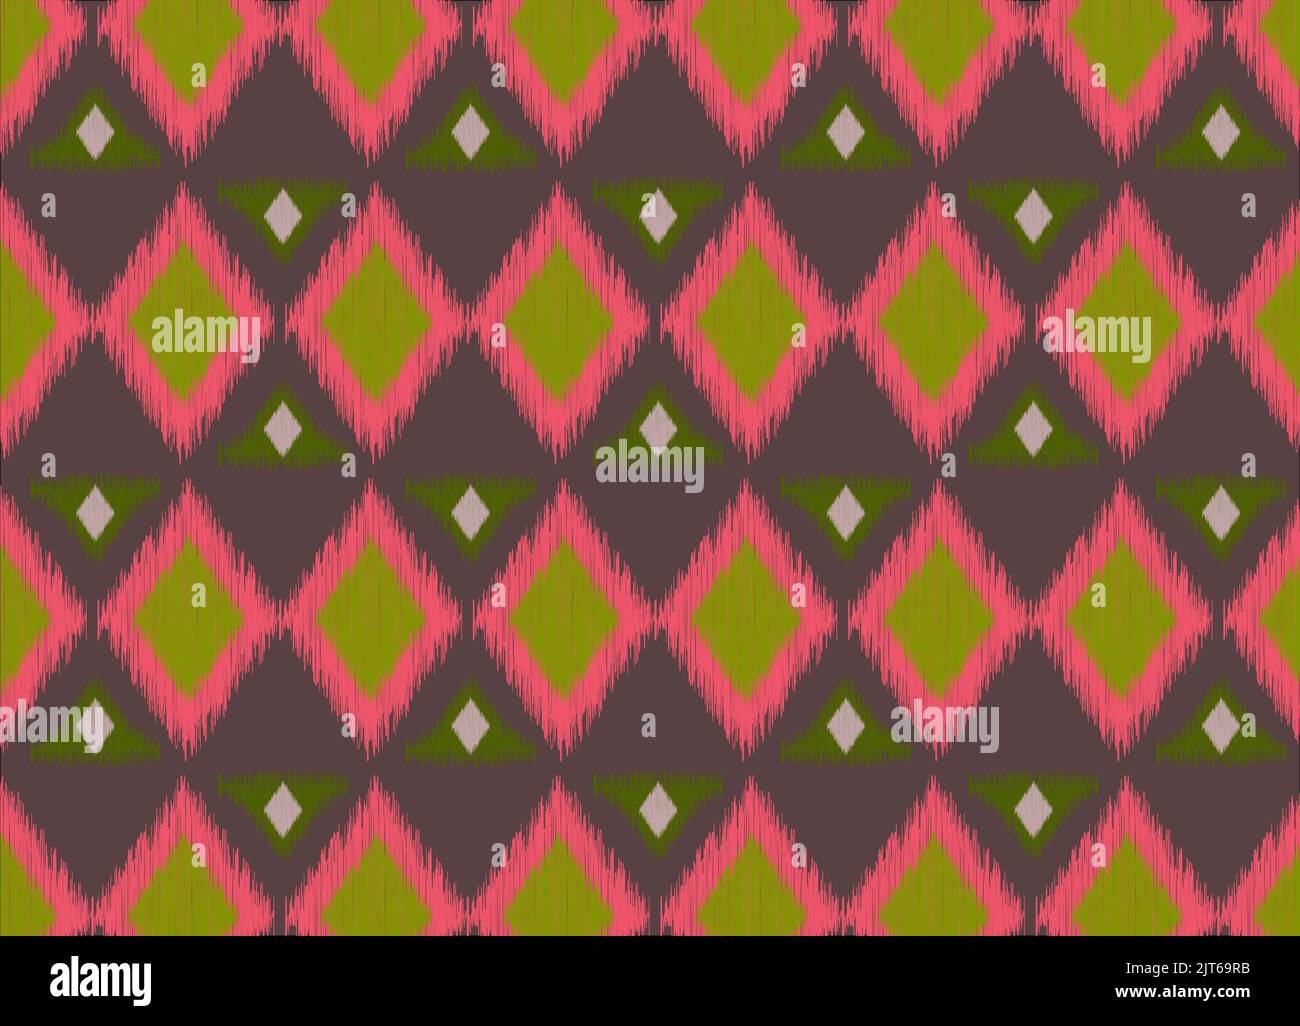 Geometric ethnic seamless Ikat Pattern. Ethnic geometric background for textile design, wallpaper, surface textures, pattern fills, wrapping paper. Stock Vector